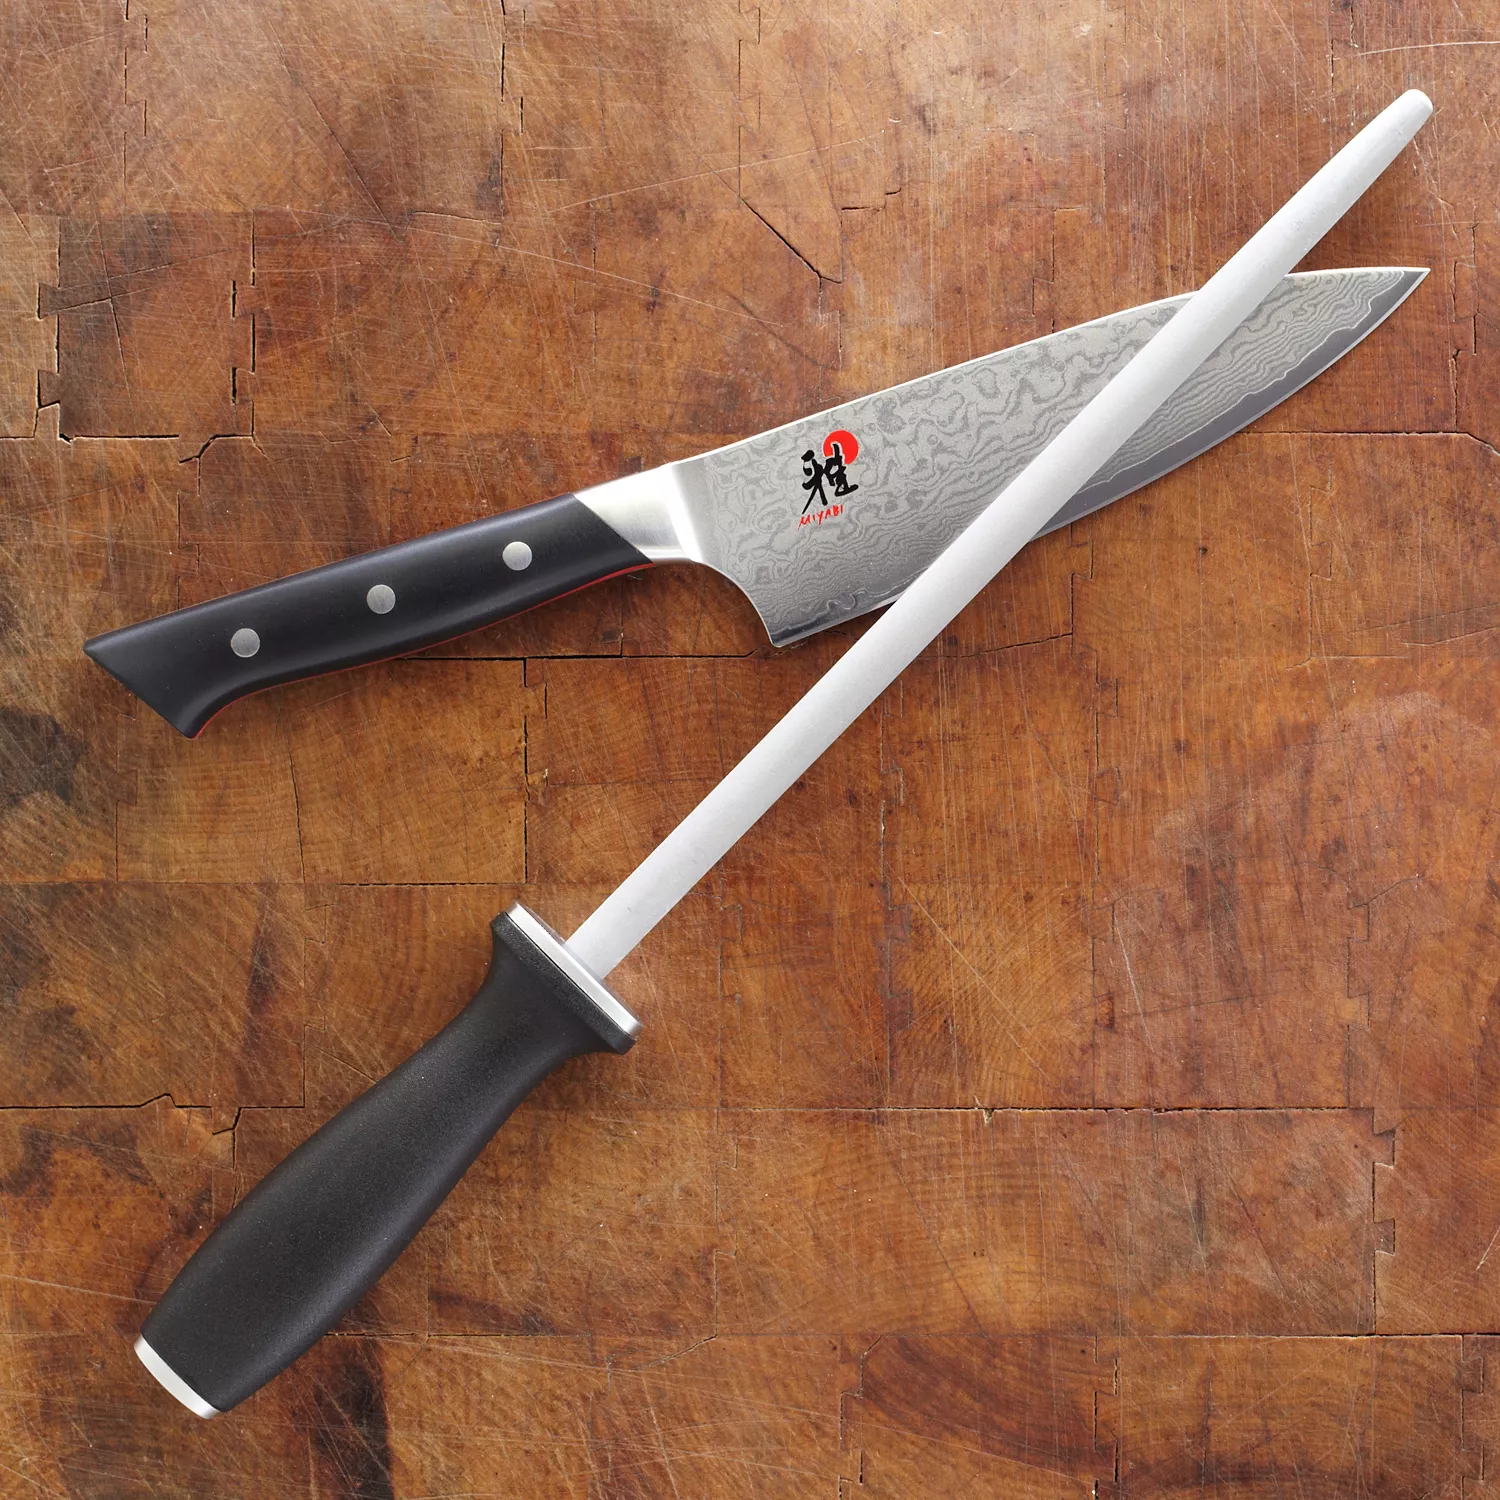 Patio Daddio BBQ: Knife Sharpening Made Simple